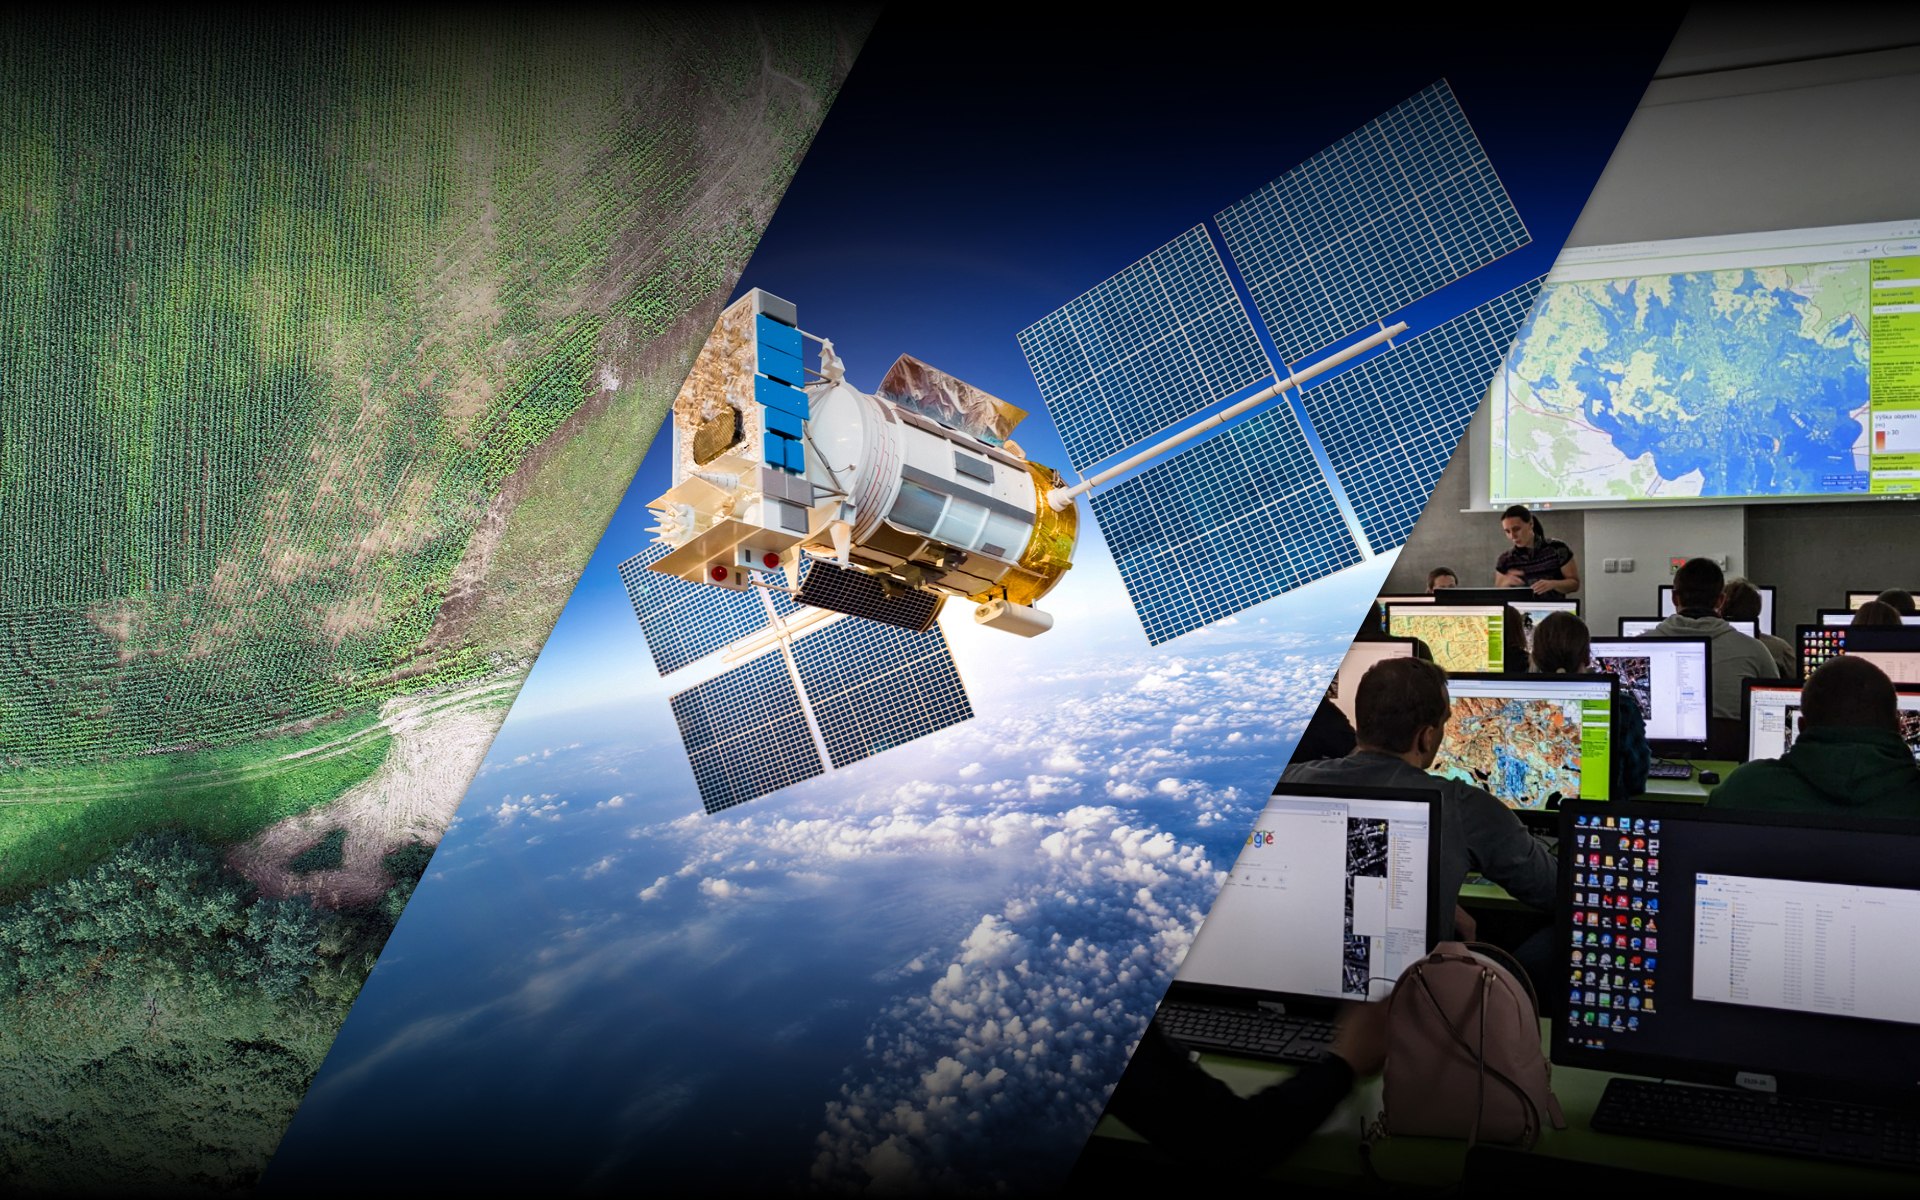 Graphic consist of three pictures. Land from drone, satelite in orbit, classroom.